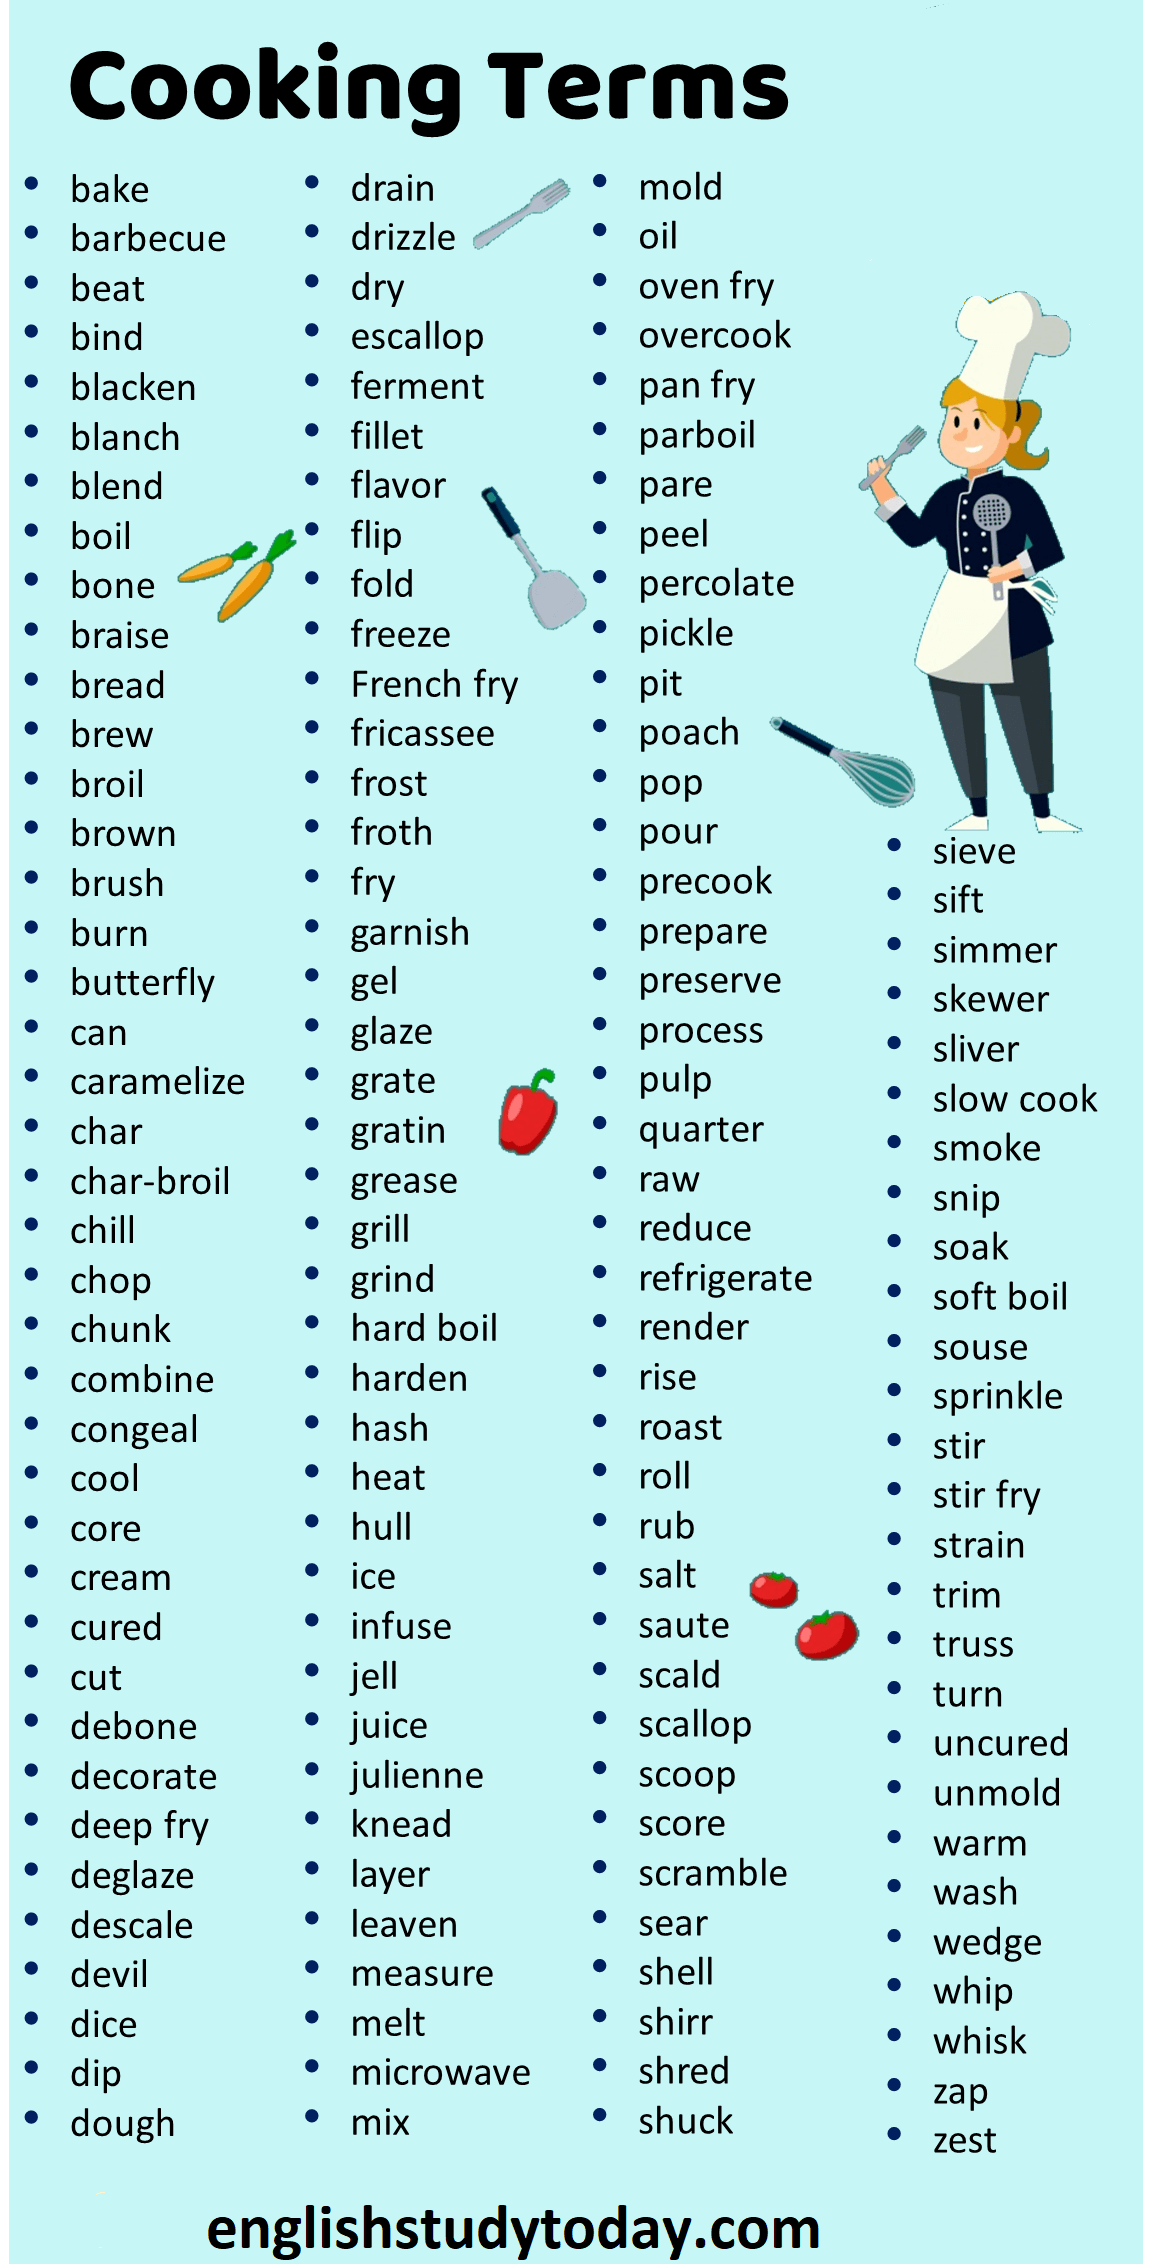 Glossary of Cooking Terms - Learn English Grammar